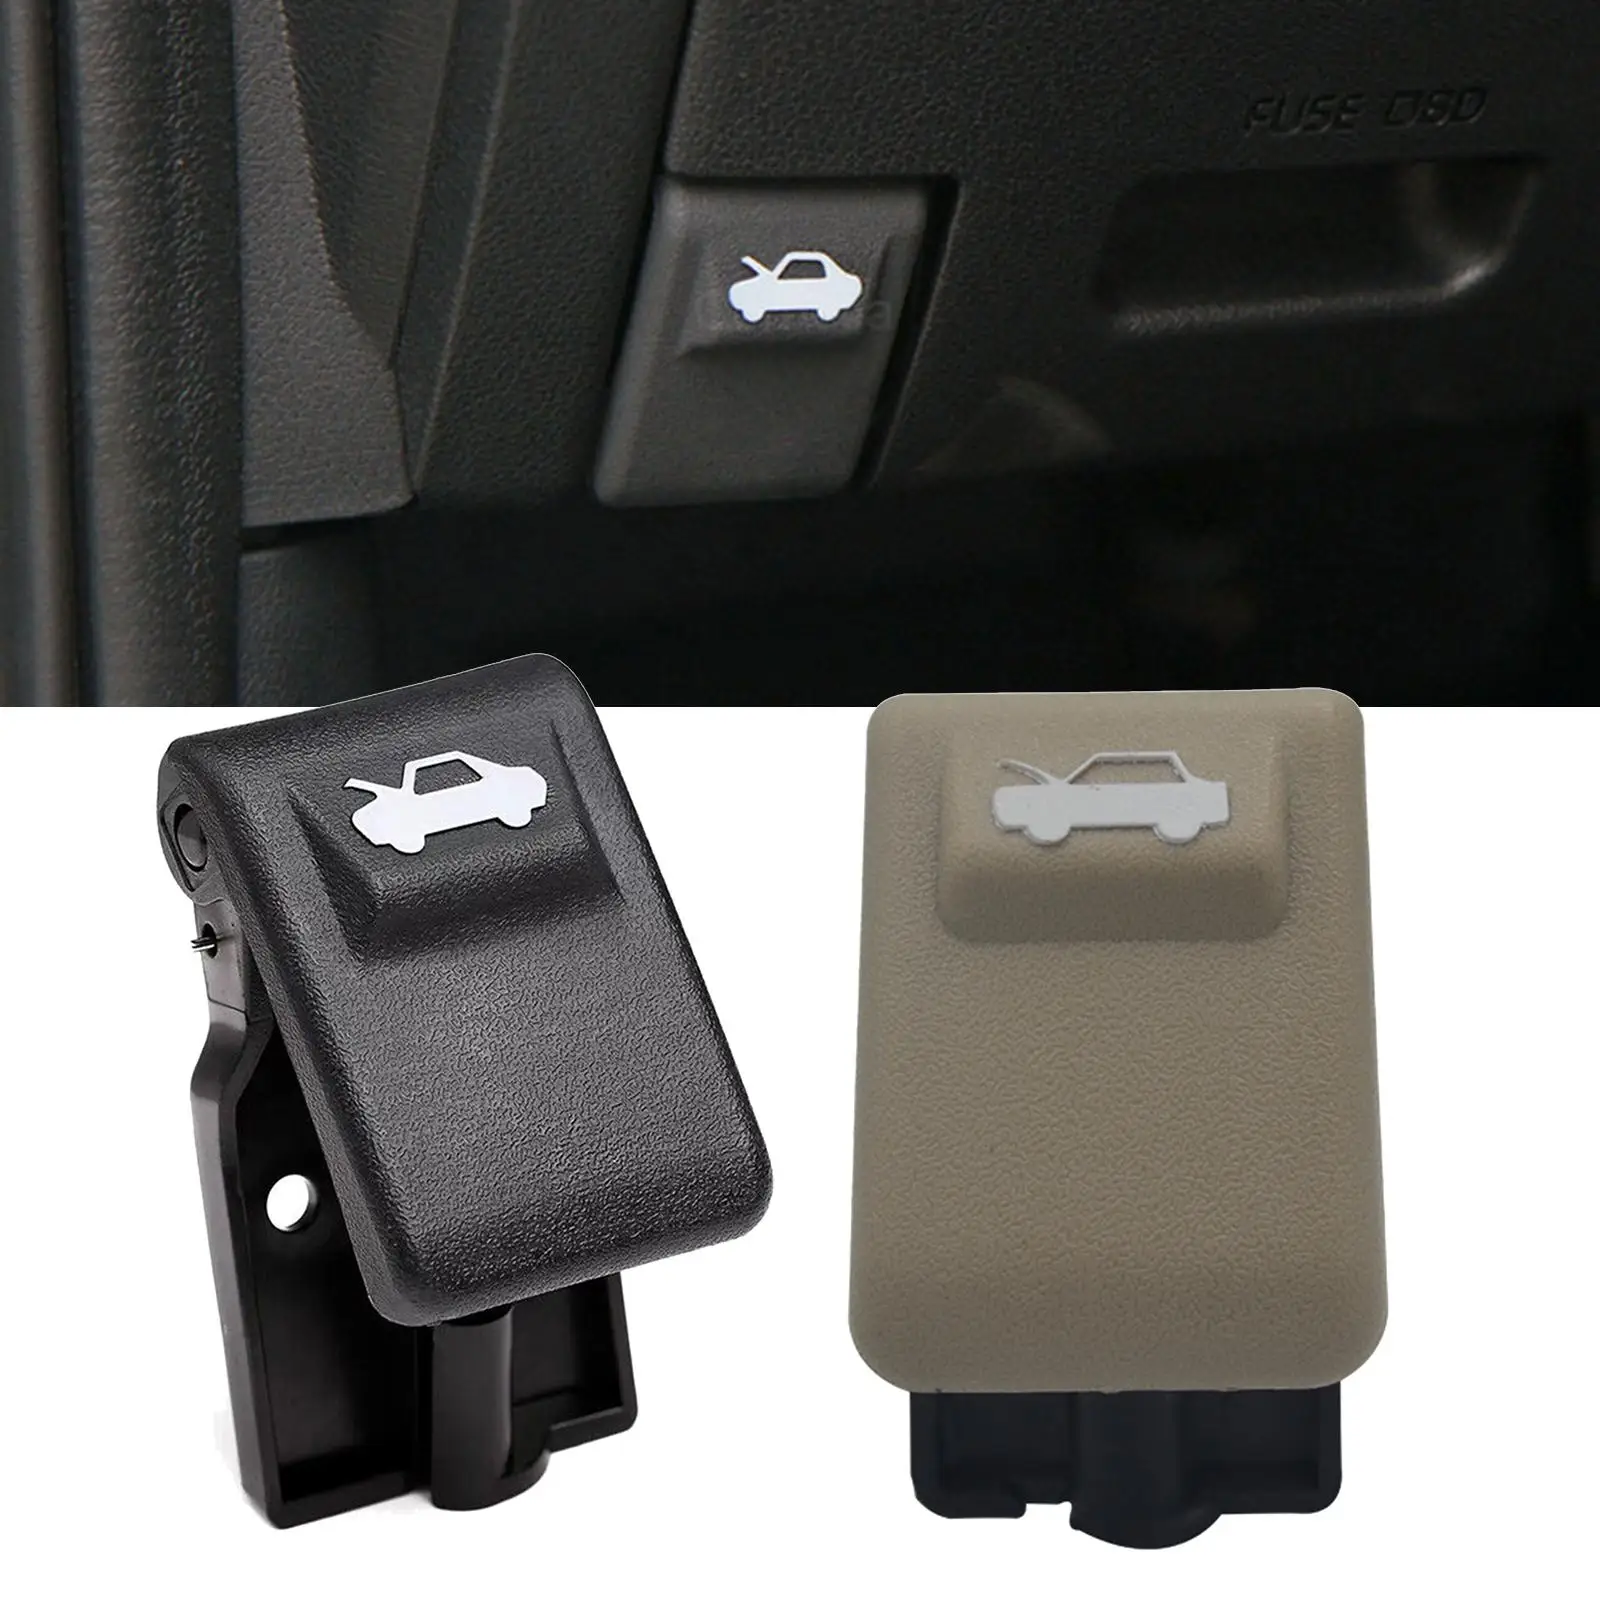 Hood Release Handle ,Car Interior Accessories, 8118034000 ,Hood Latch Release Pull Handle for Accent Easy Installation